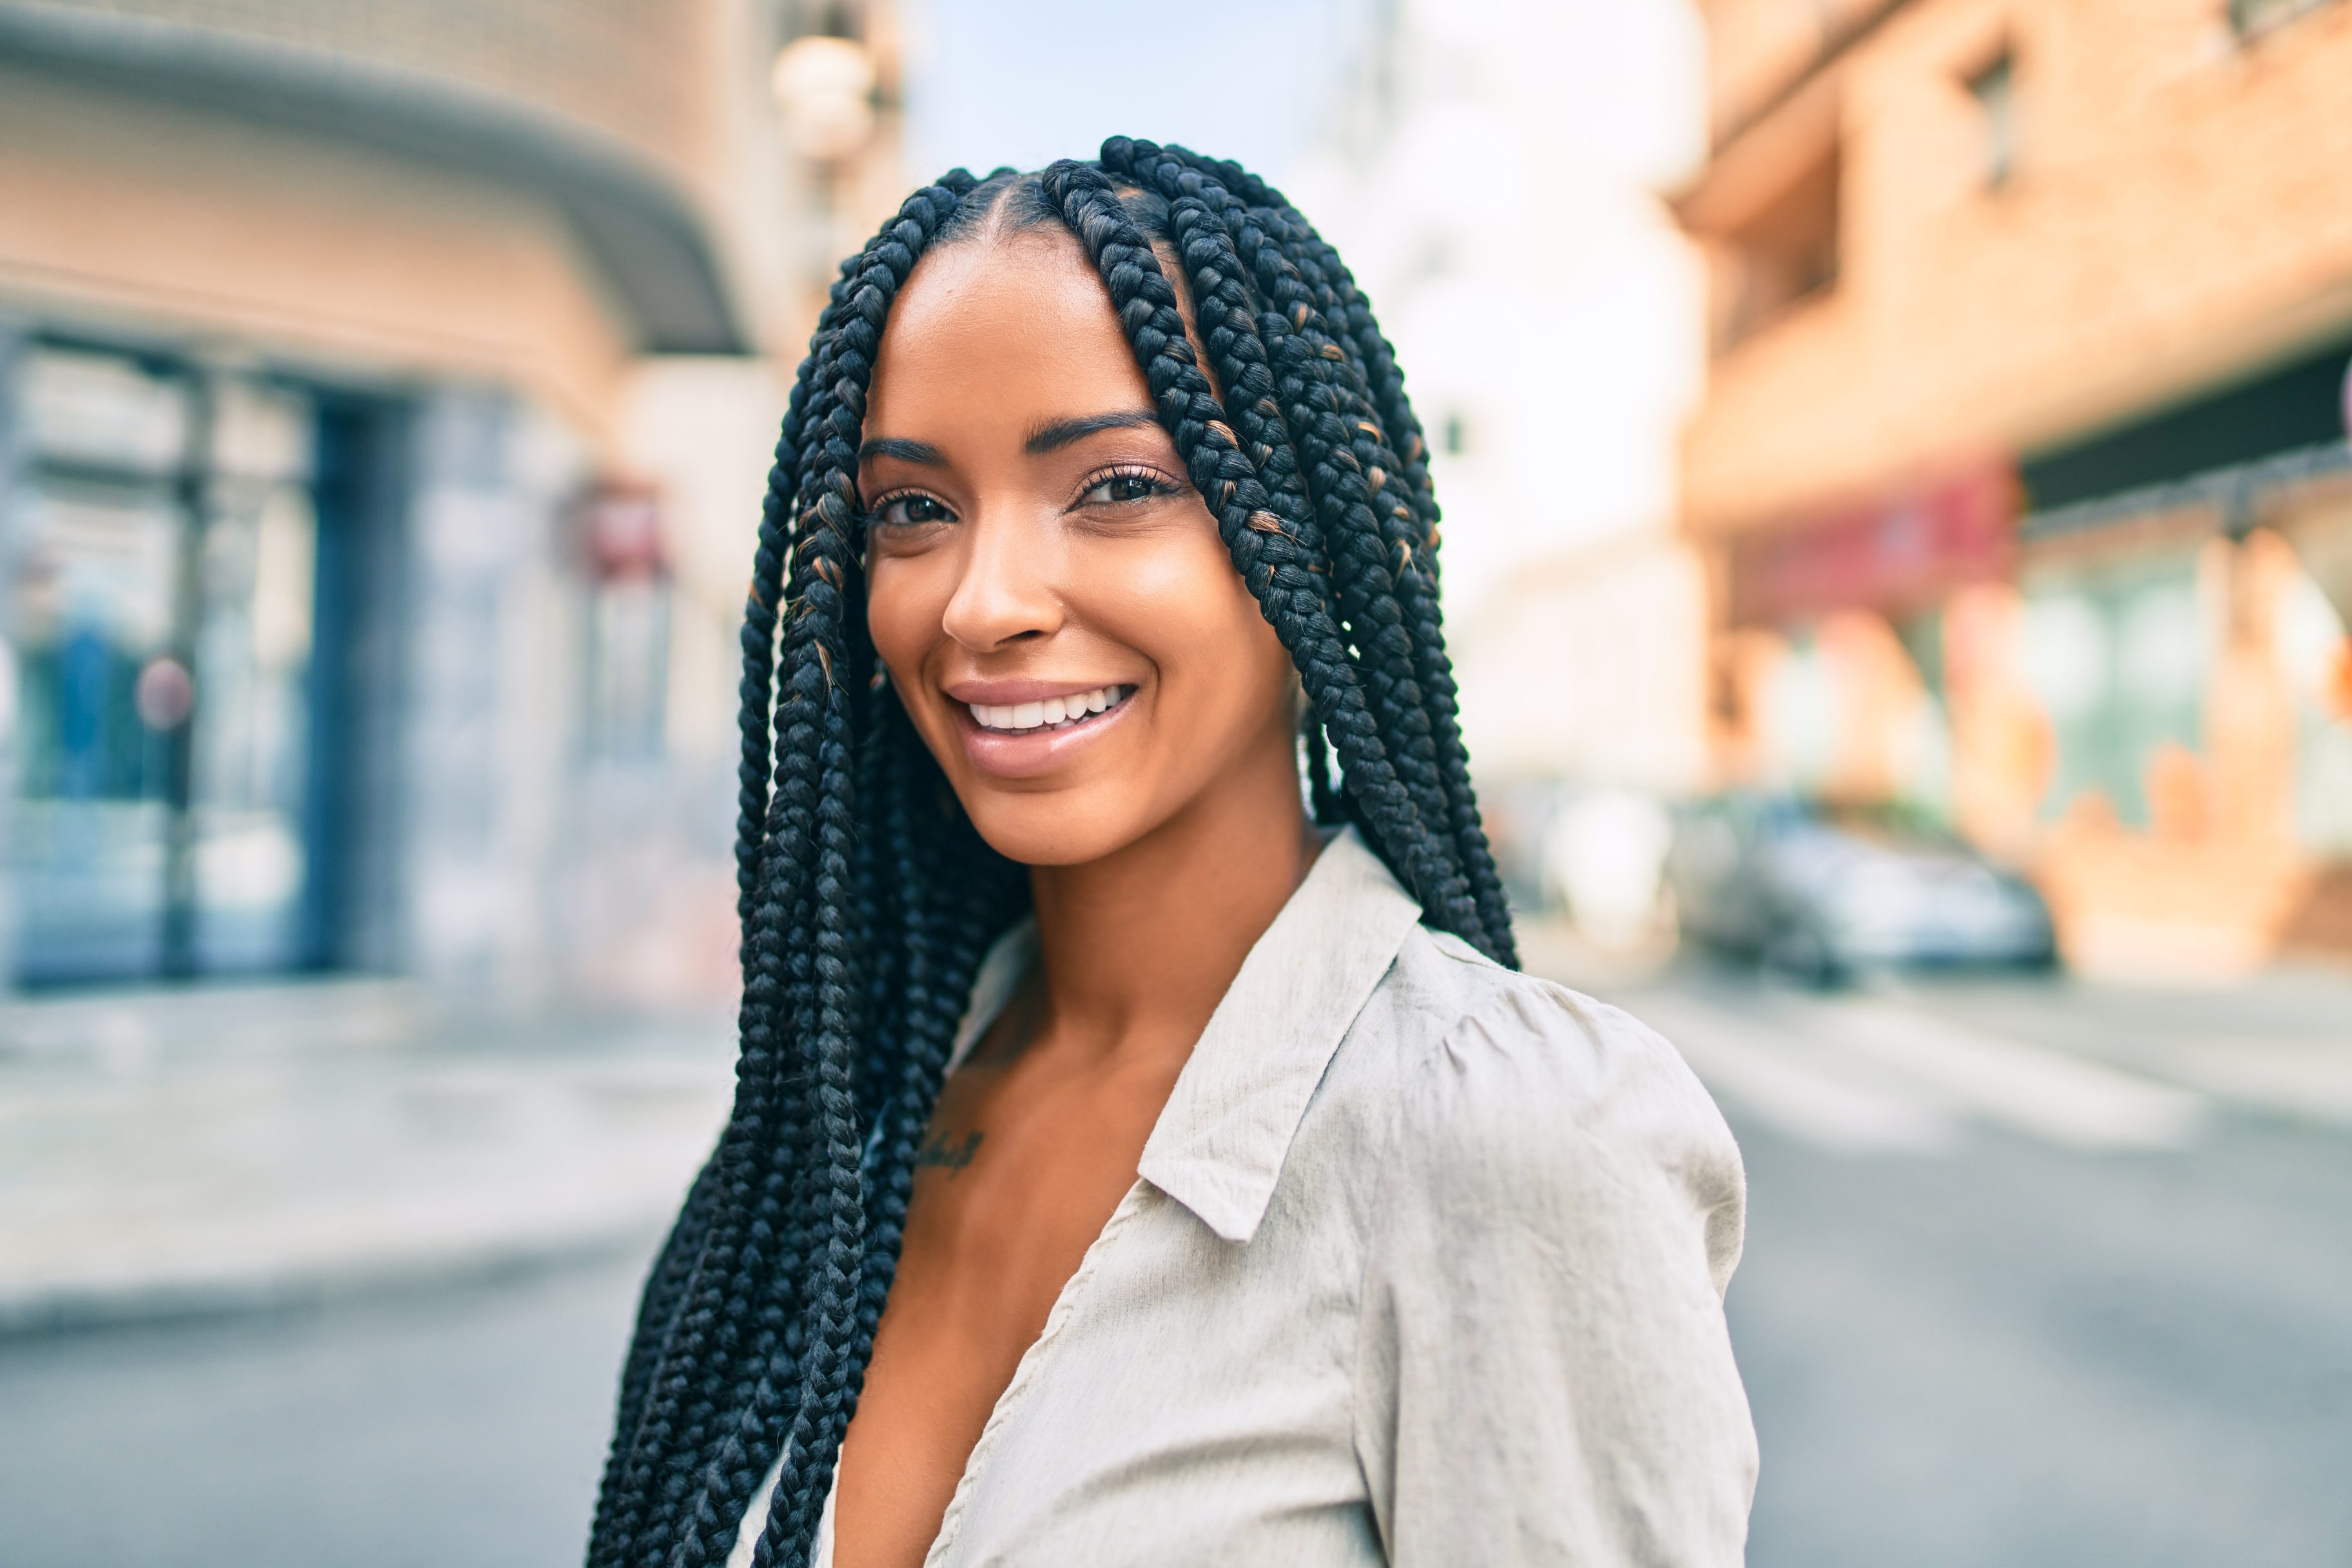 Medium-Size Braids With Swooped Edges